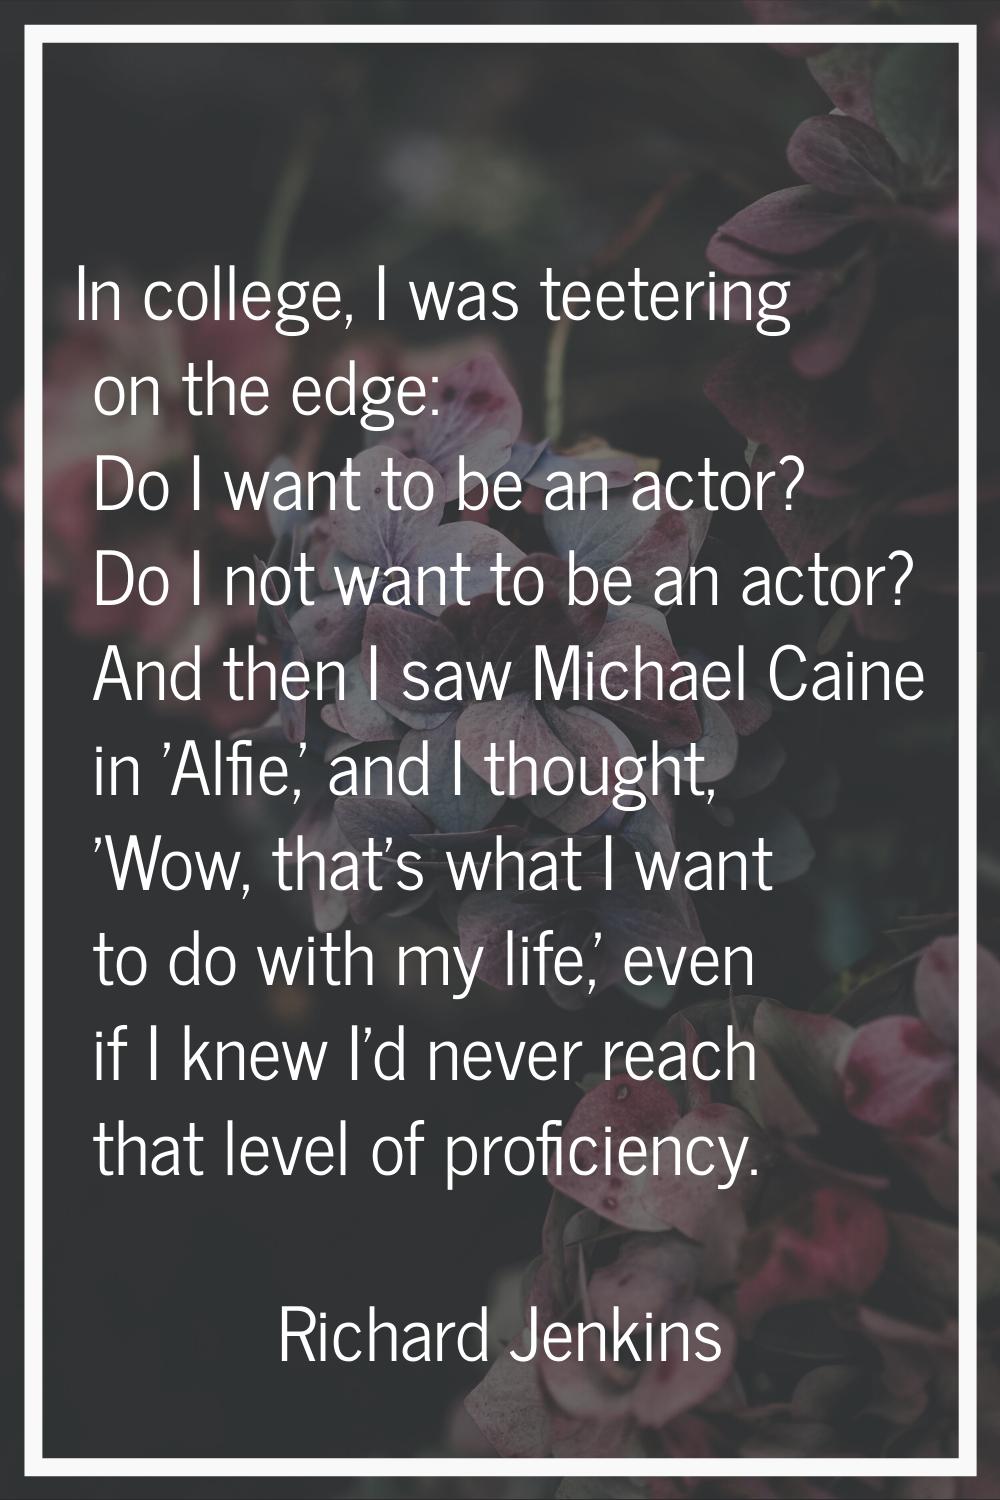 In college, I was teetering on the edge: Do I want to be an actor? Do I not want to be an actor? An